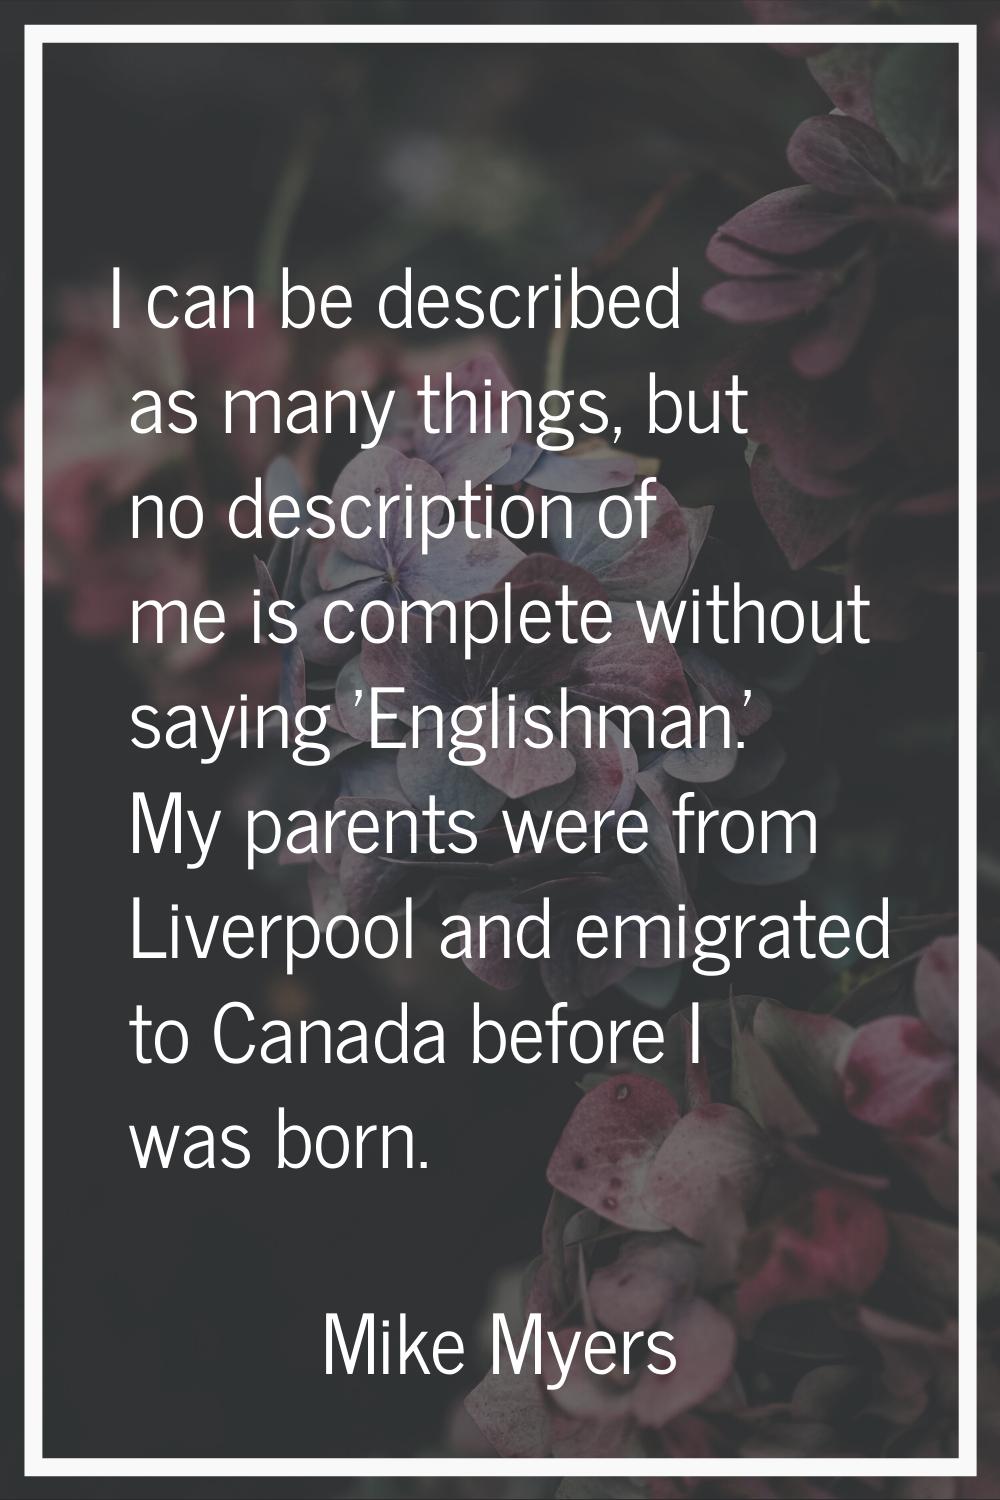 I can be described as many things, but no description of me is complete without saying 'Englishman.